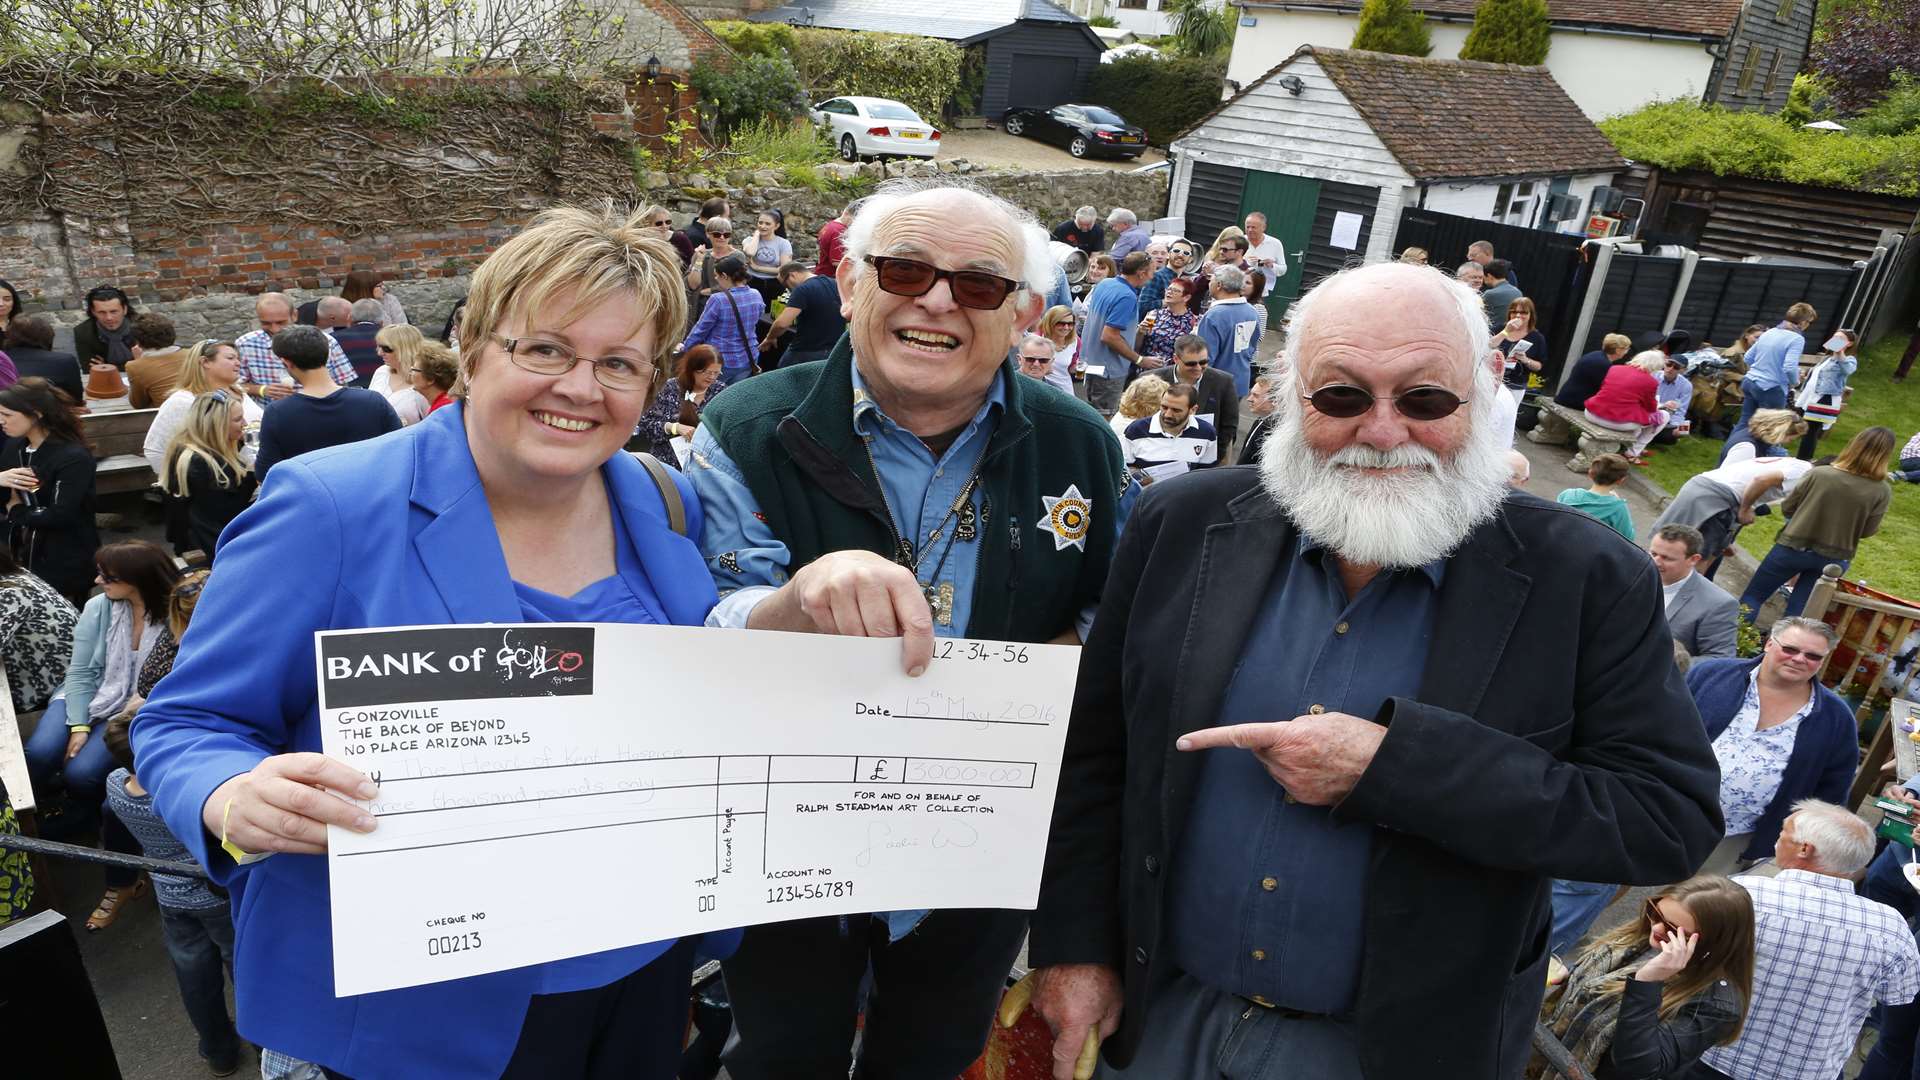 Sue Shaw accepts a cheque for £3,000 on behalf of the Heart of Kent Hospice, from Ralph Steadman, assisted by Graham Clarke